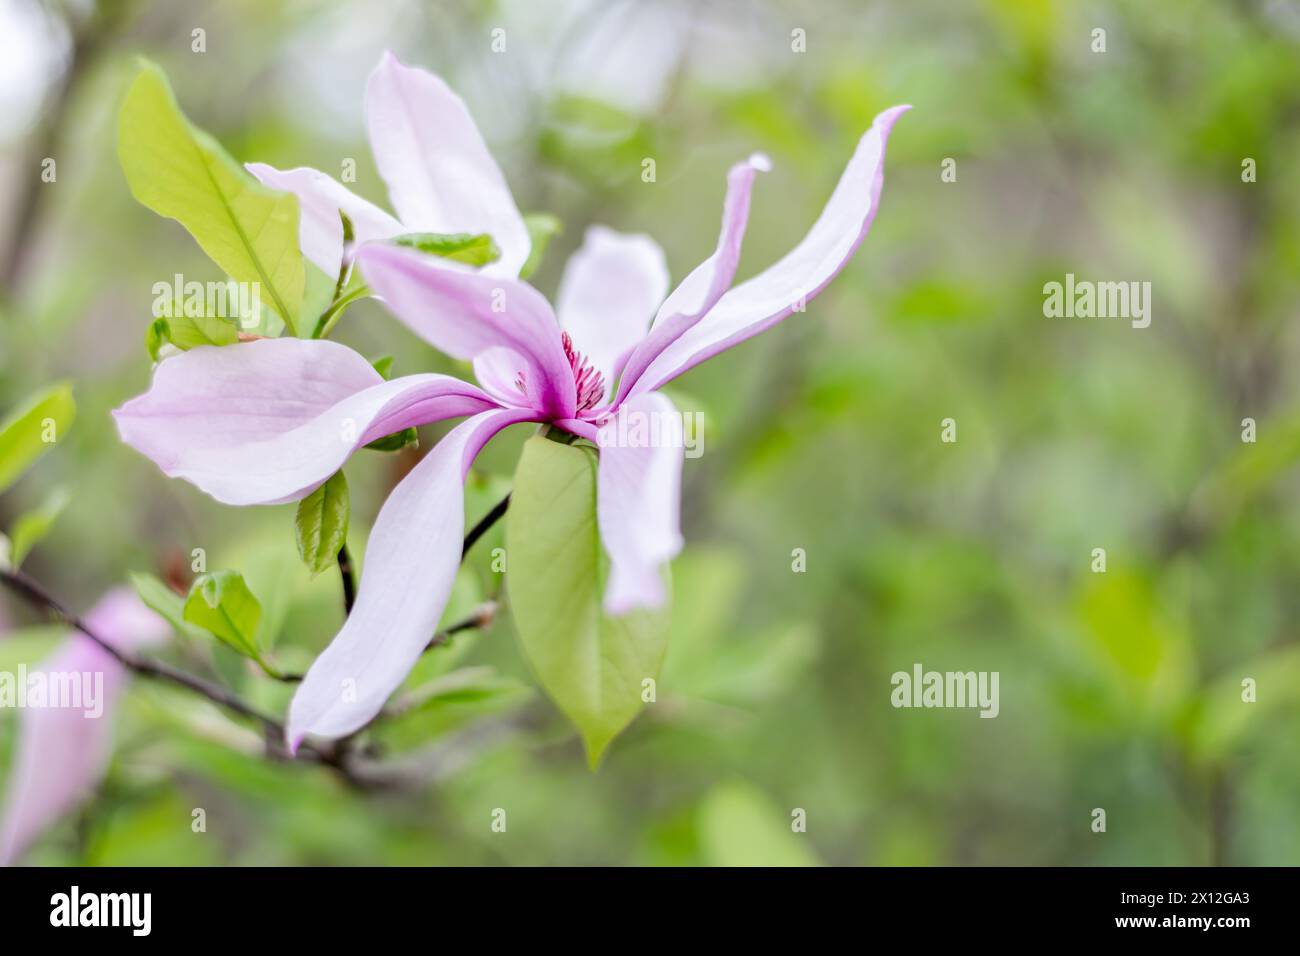 A Pink Magnolia Flower in Bloom Stock Photo